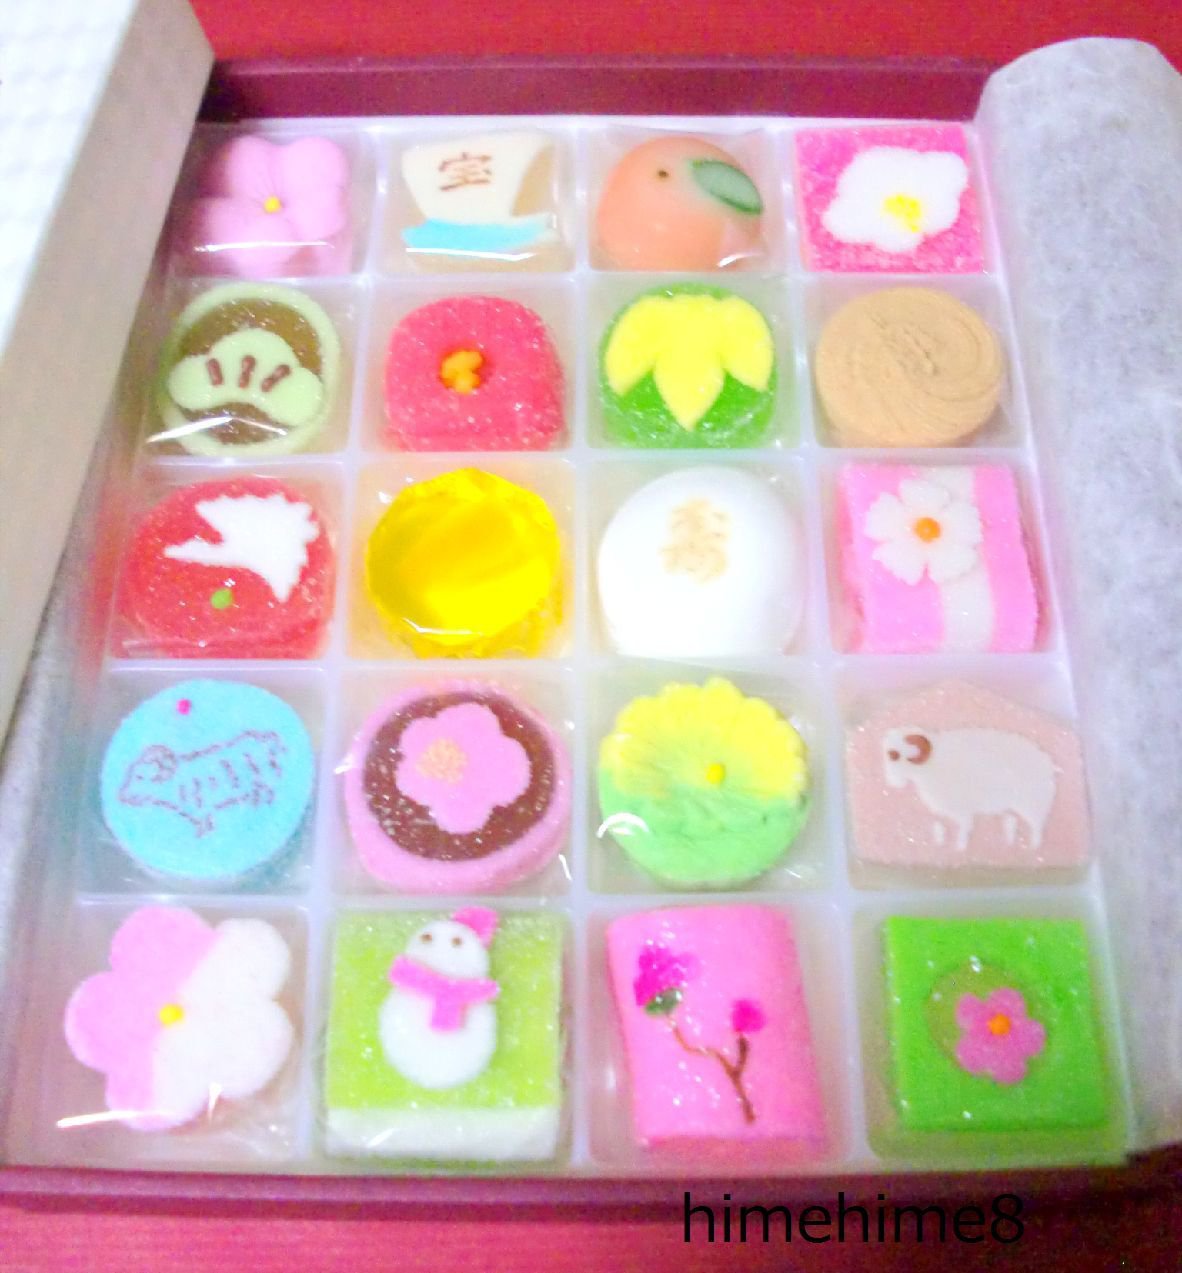 Maiko KYOGASHI Candy Jelly Sweets Sugar Confectionery Japanese from ...